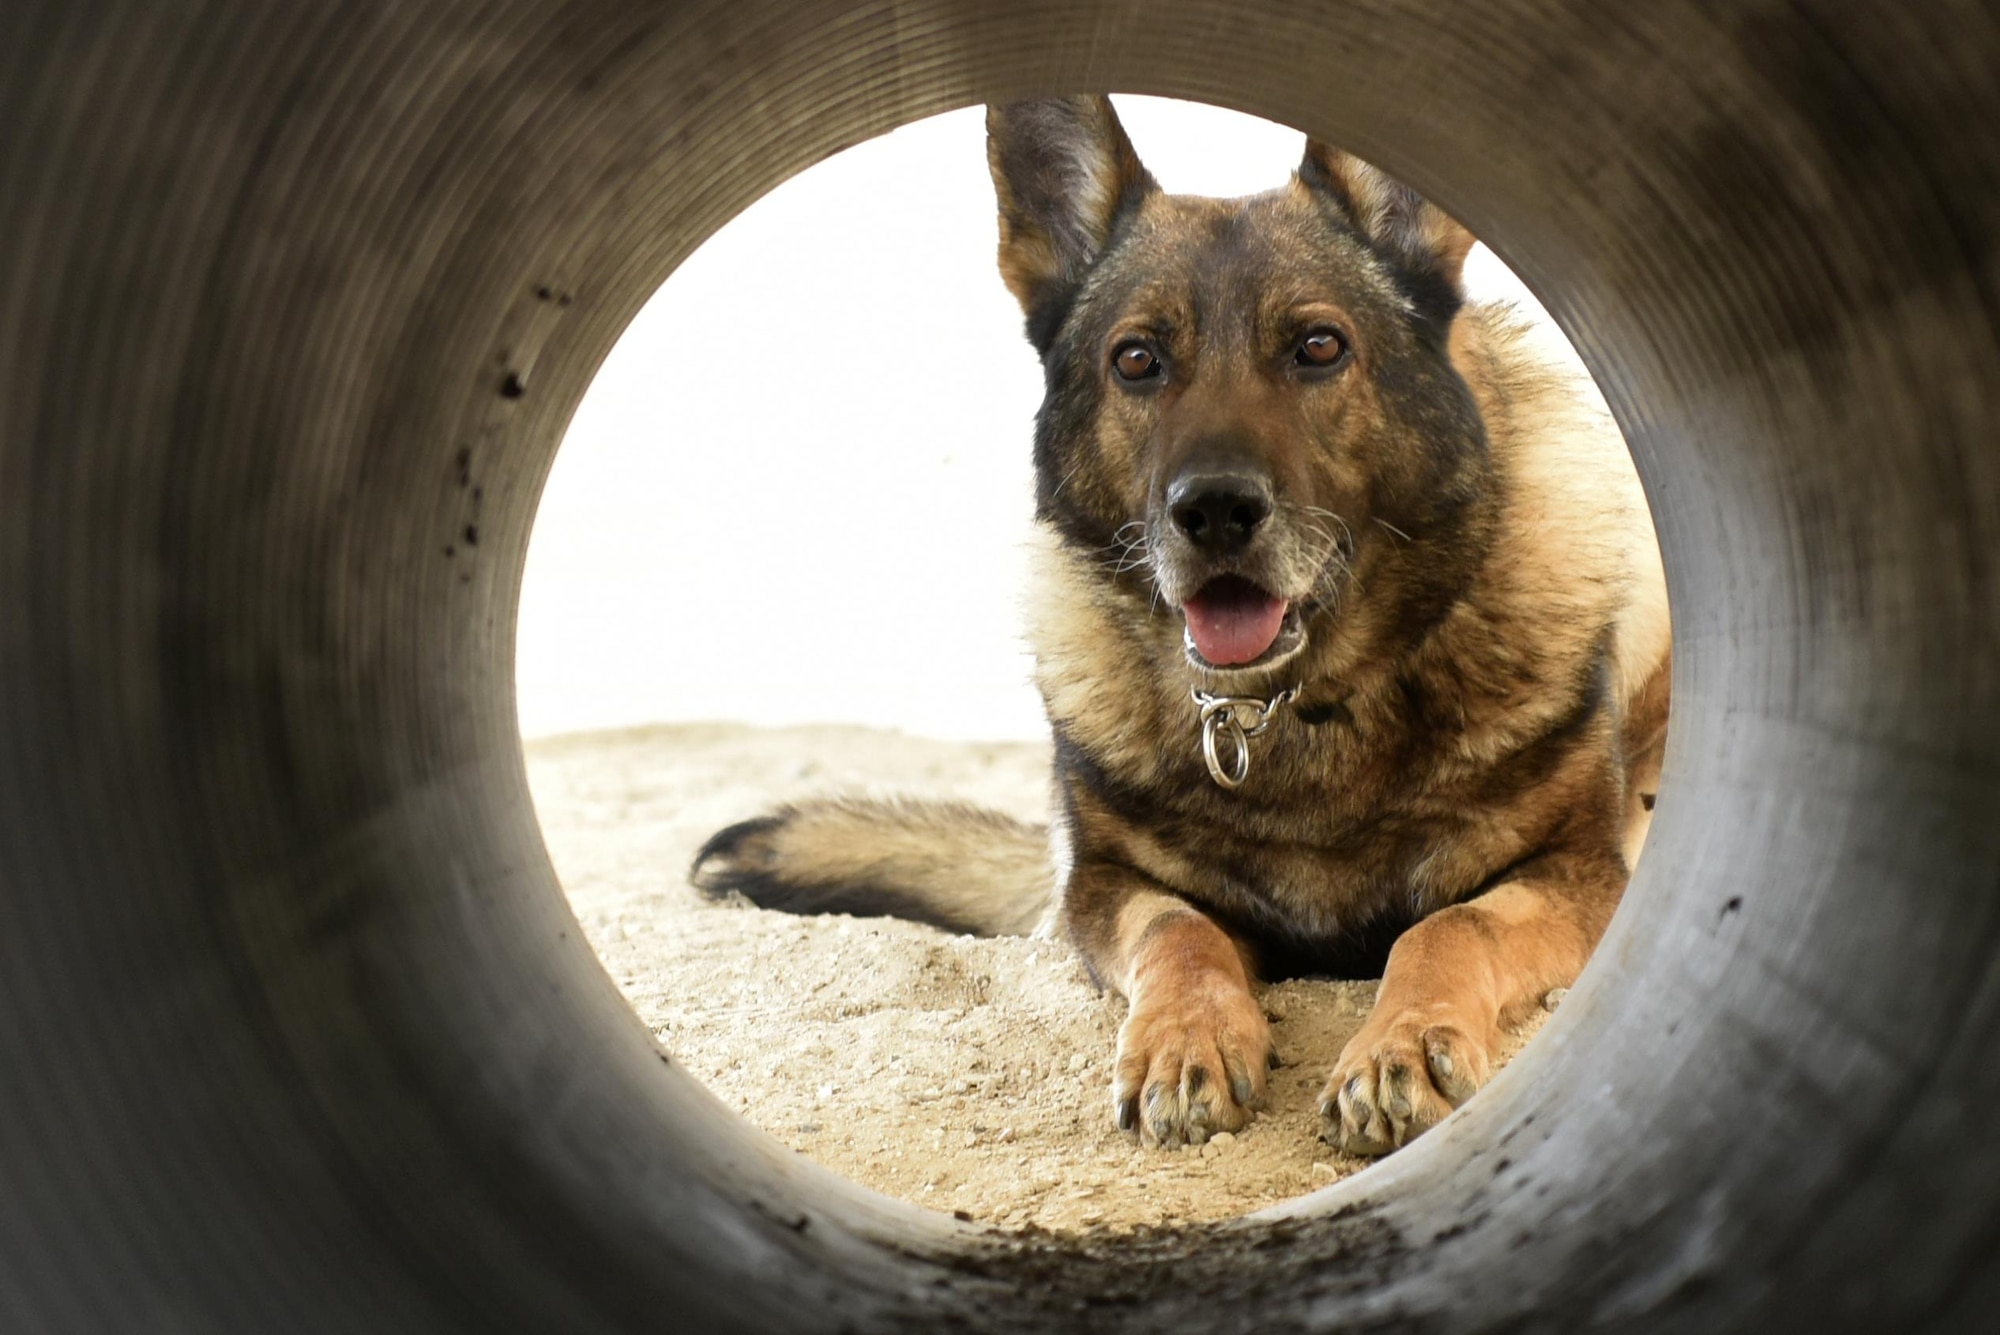 Egon, 407th Expeditionary Security Forces Squadron military working dog, stops after being commanded during an obsticle course training exercise May 23, 2017, at the 407th Air Expeditionary Group in Southwest Asia. Egon's handler is Senior Airman Carlton Isaacson, they have been partners for approximately a year and a half. (U.S. Air Force photo by Senior Airman Ramon A. Adelan)